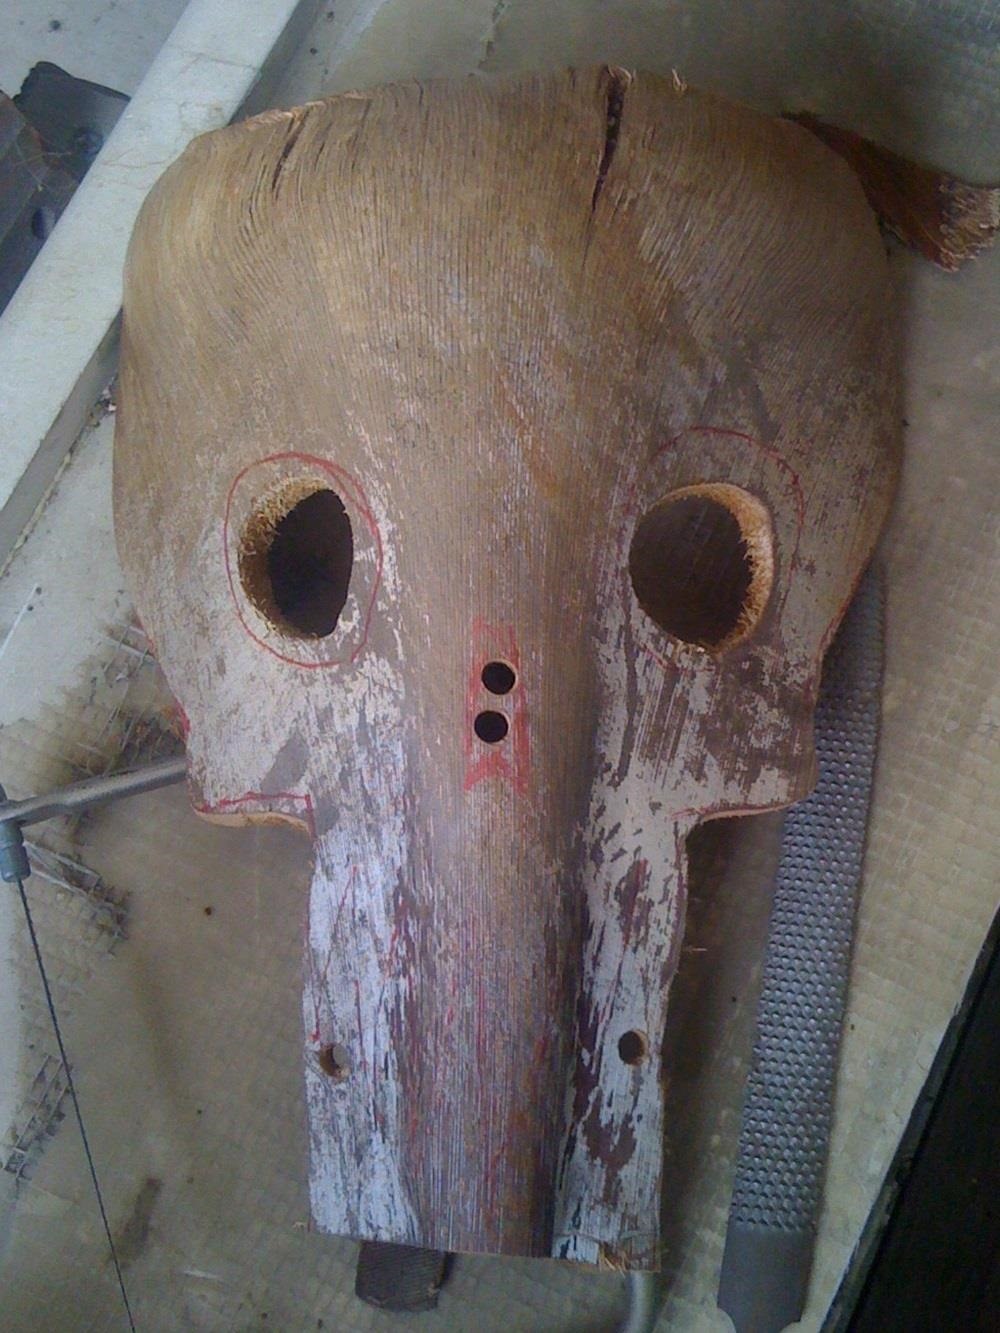 Yard Waste = Free Halloween Costume: How to Make Creepy Masks from Fallen Palm Tree Fronds